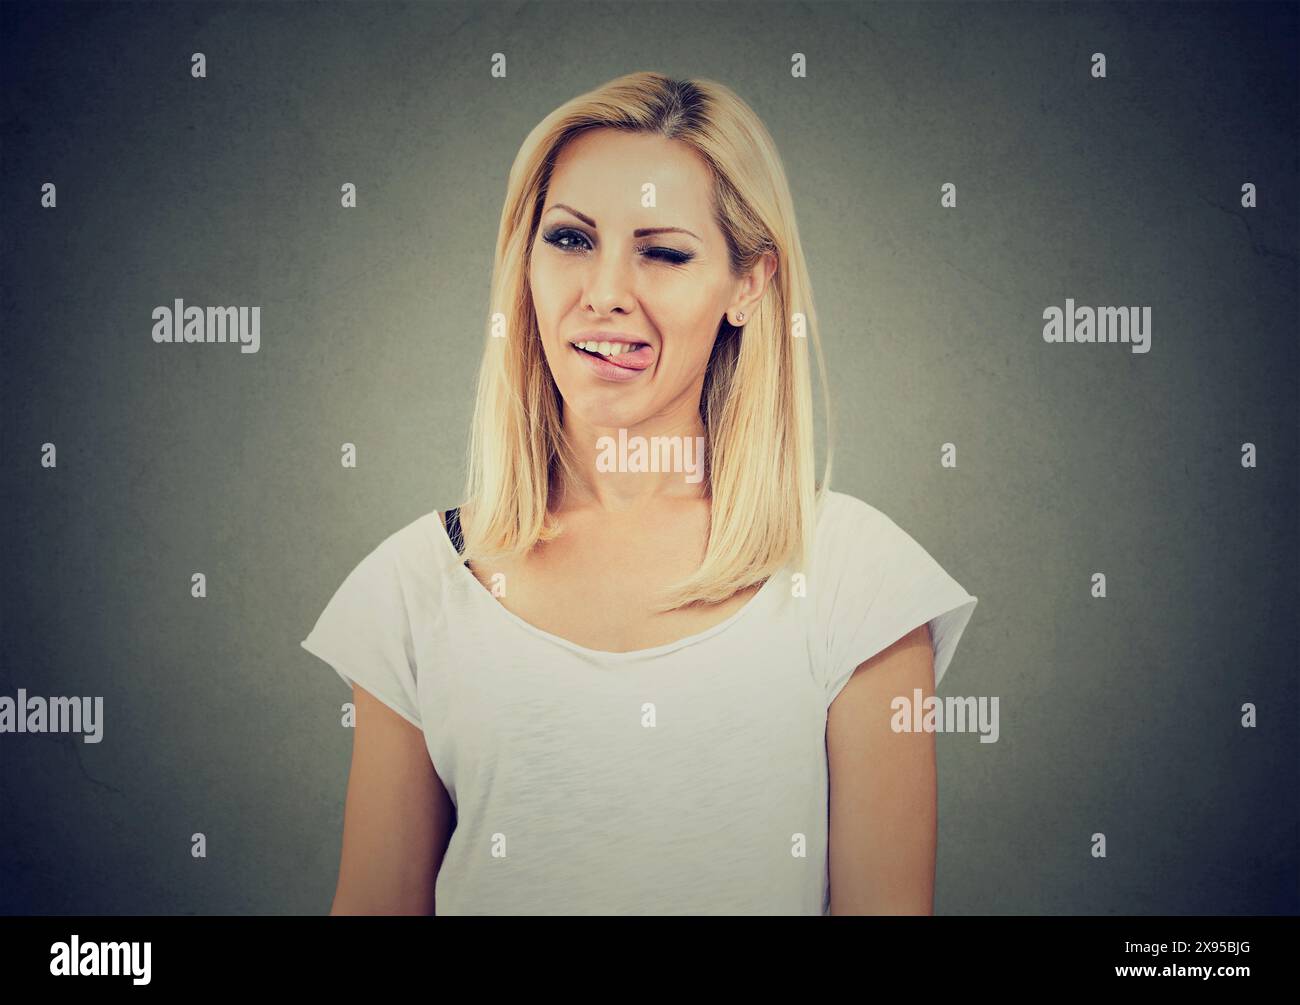 Naughty blond young woman sticking out tongue on camera Stock Photo